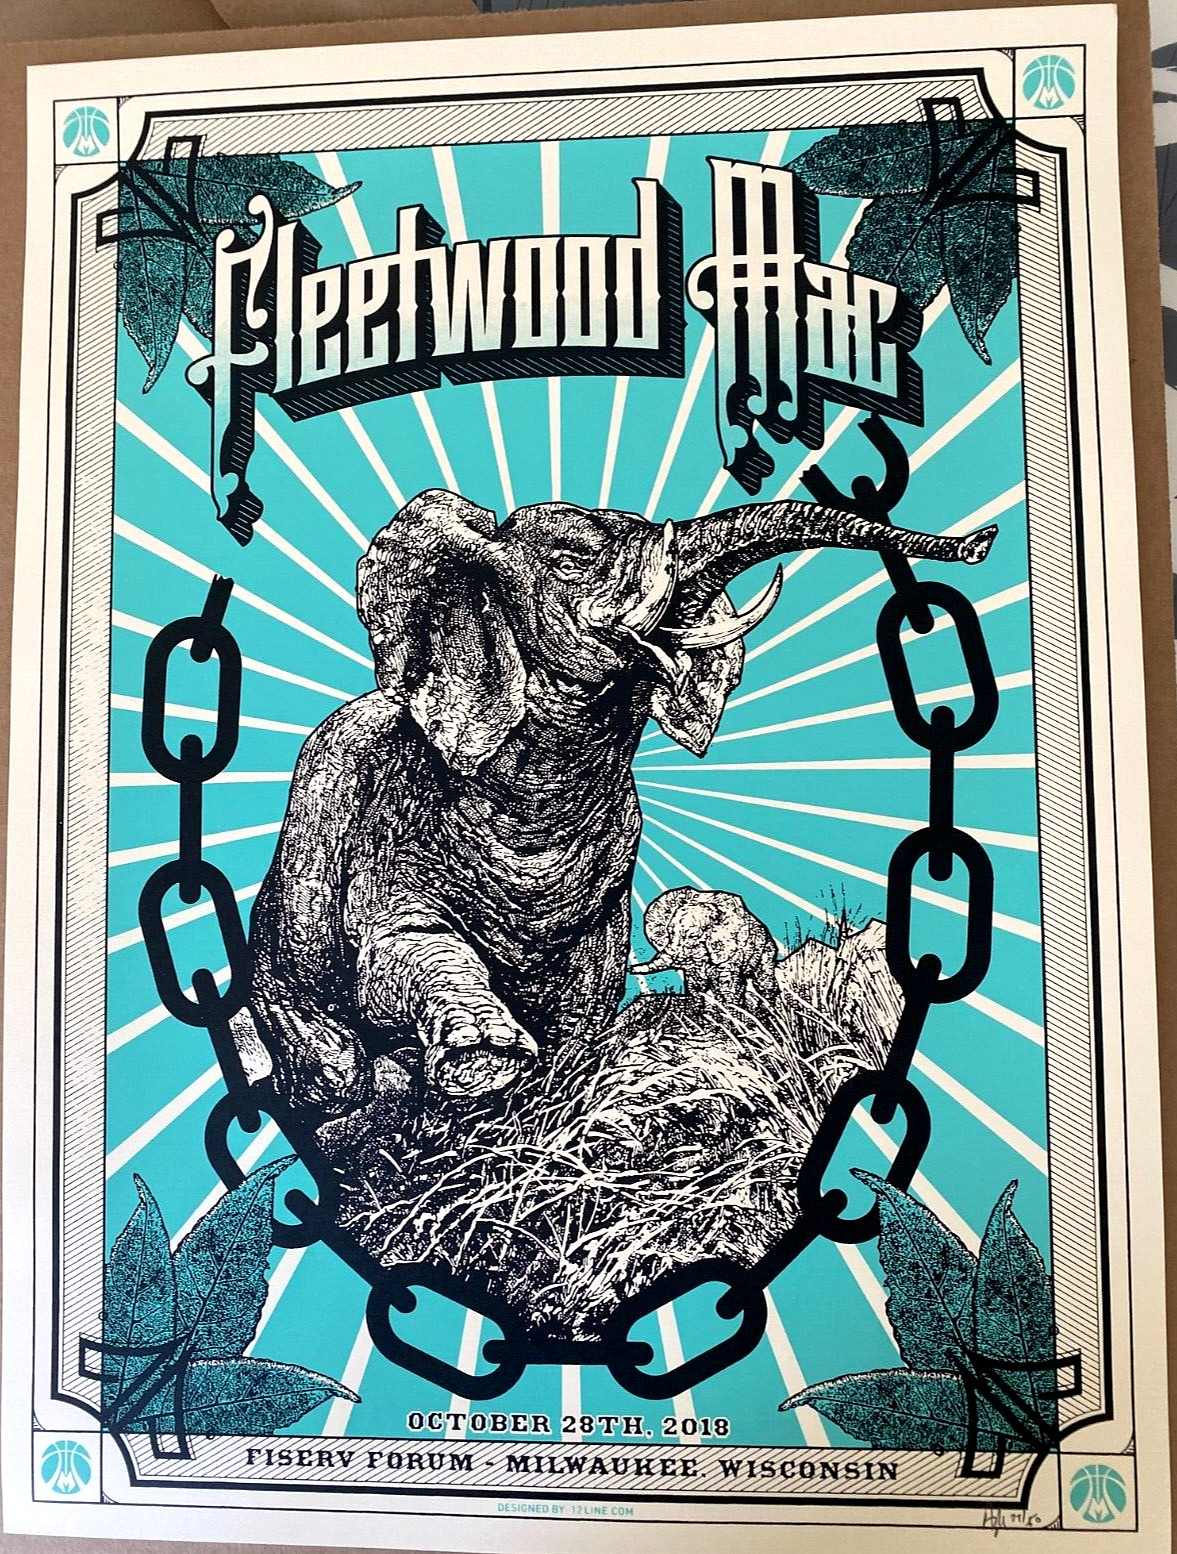 FLEETWOOD MAC Fiserv Milwaukee WI OCT 28th 2018 SIGNED S/N AE #/50 Poster Print